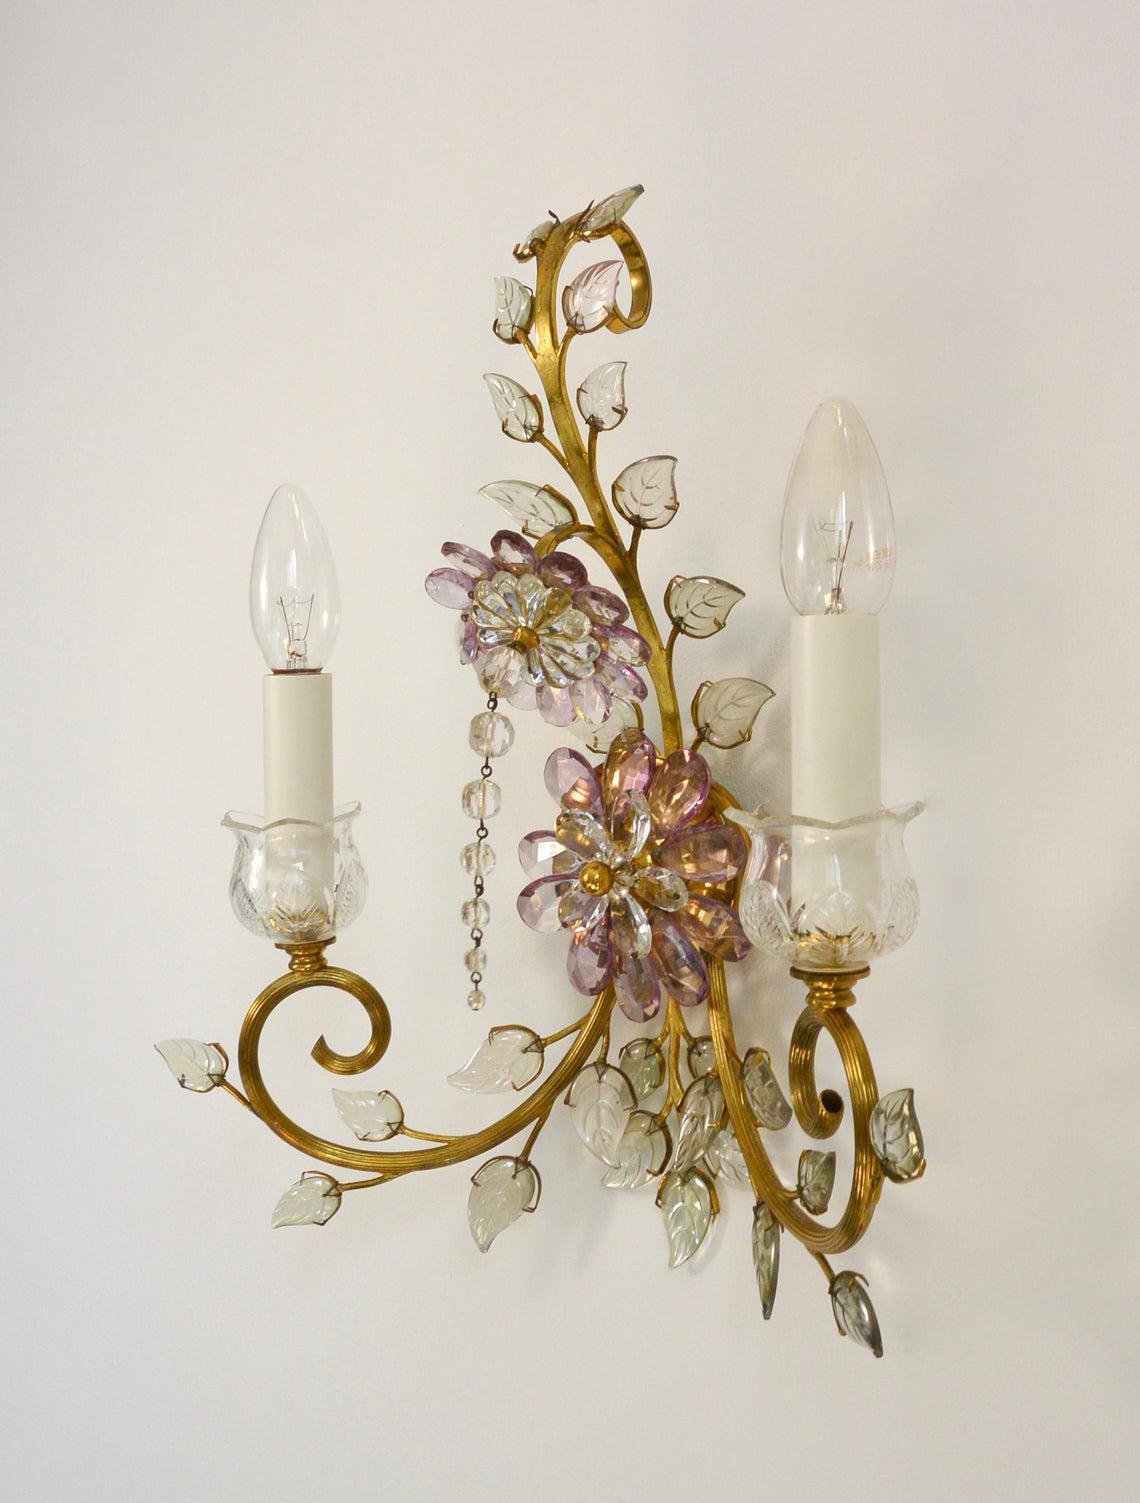 Stunning French Mid Century Modern Cut Crystal Floral Form Wall Sconce. Verde and amethyst crystal petals and flowers. Magnificent!